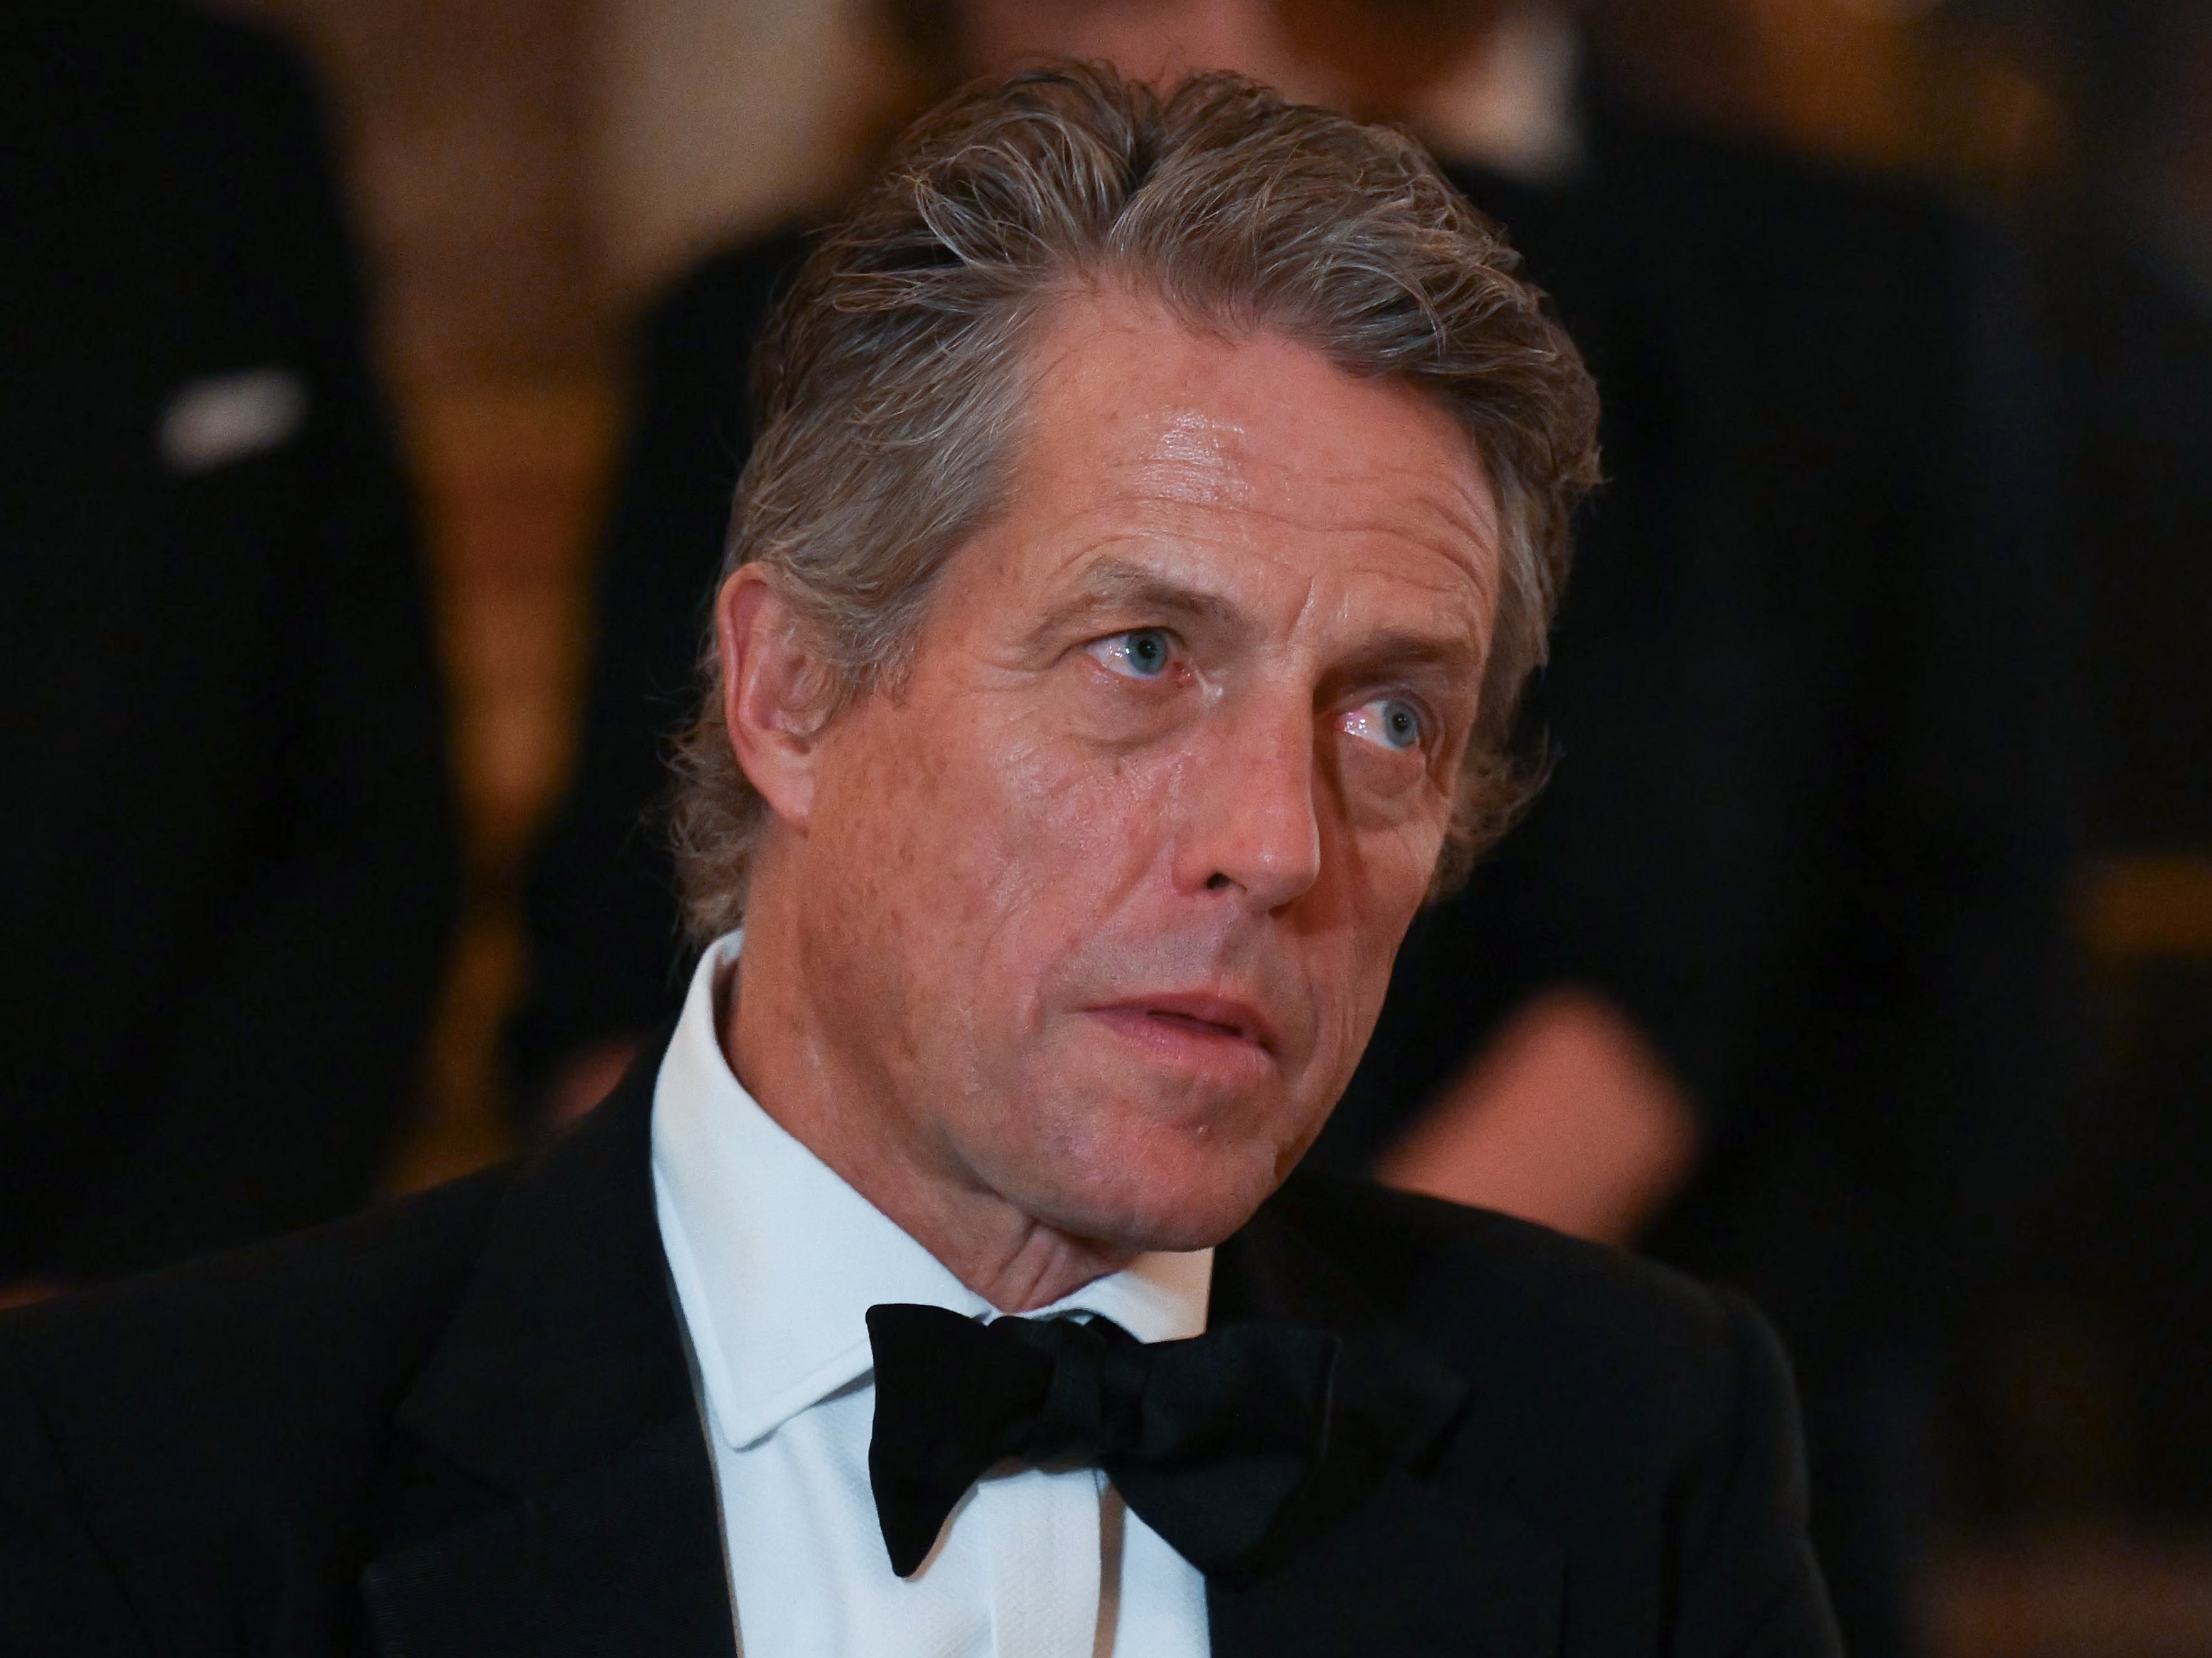 Hugh Grant has long been critical of the Conservative Party